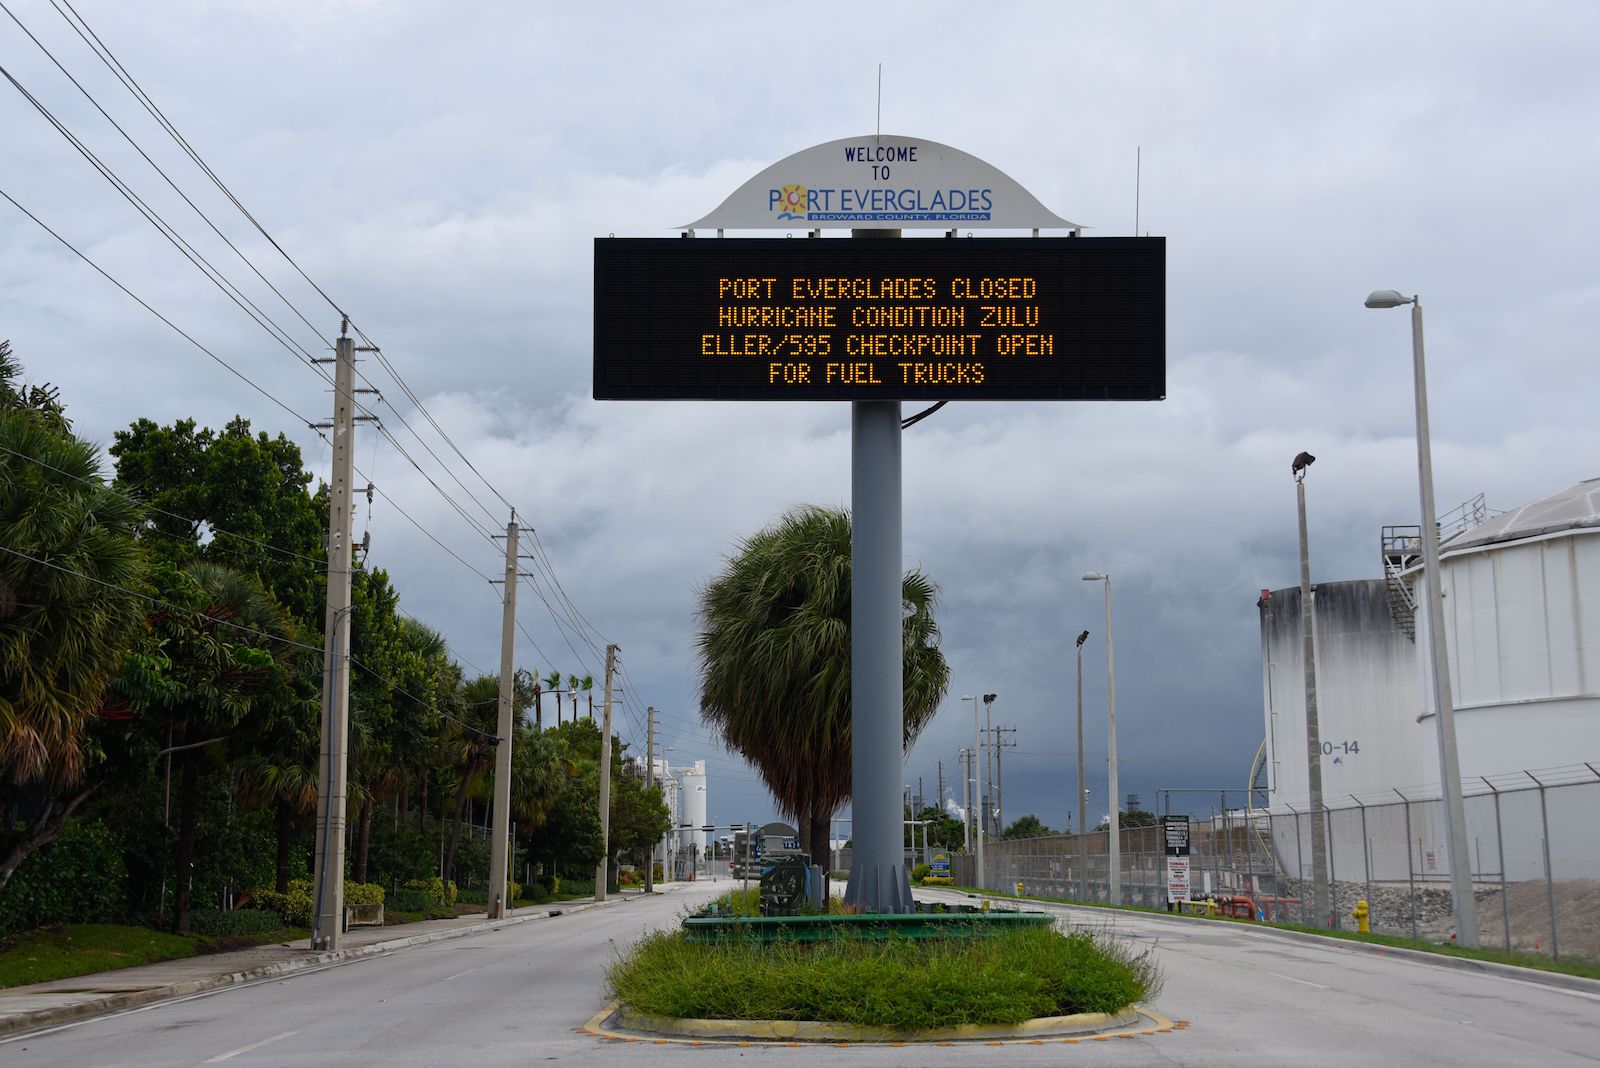 a large, tall, metal Port of Everglades sign with a black backround and orange light-up lettering stands at the center of the image. It reads, "Port Everglades closed. Hurricane condition zulu, eller/595 checkpoint open for fuel trucks." Behind the sign, the sky is dark and stormy.